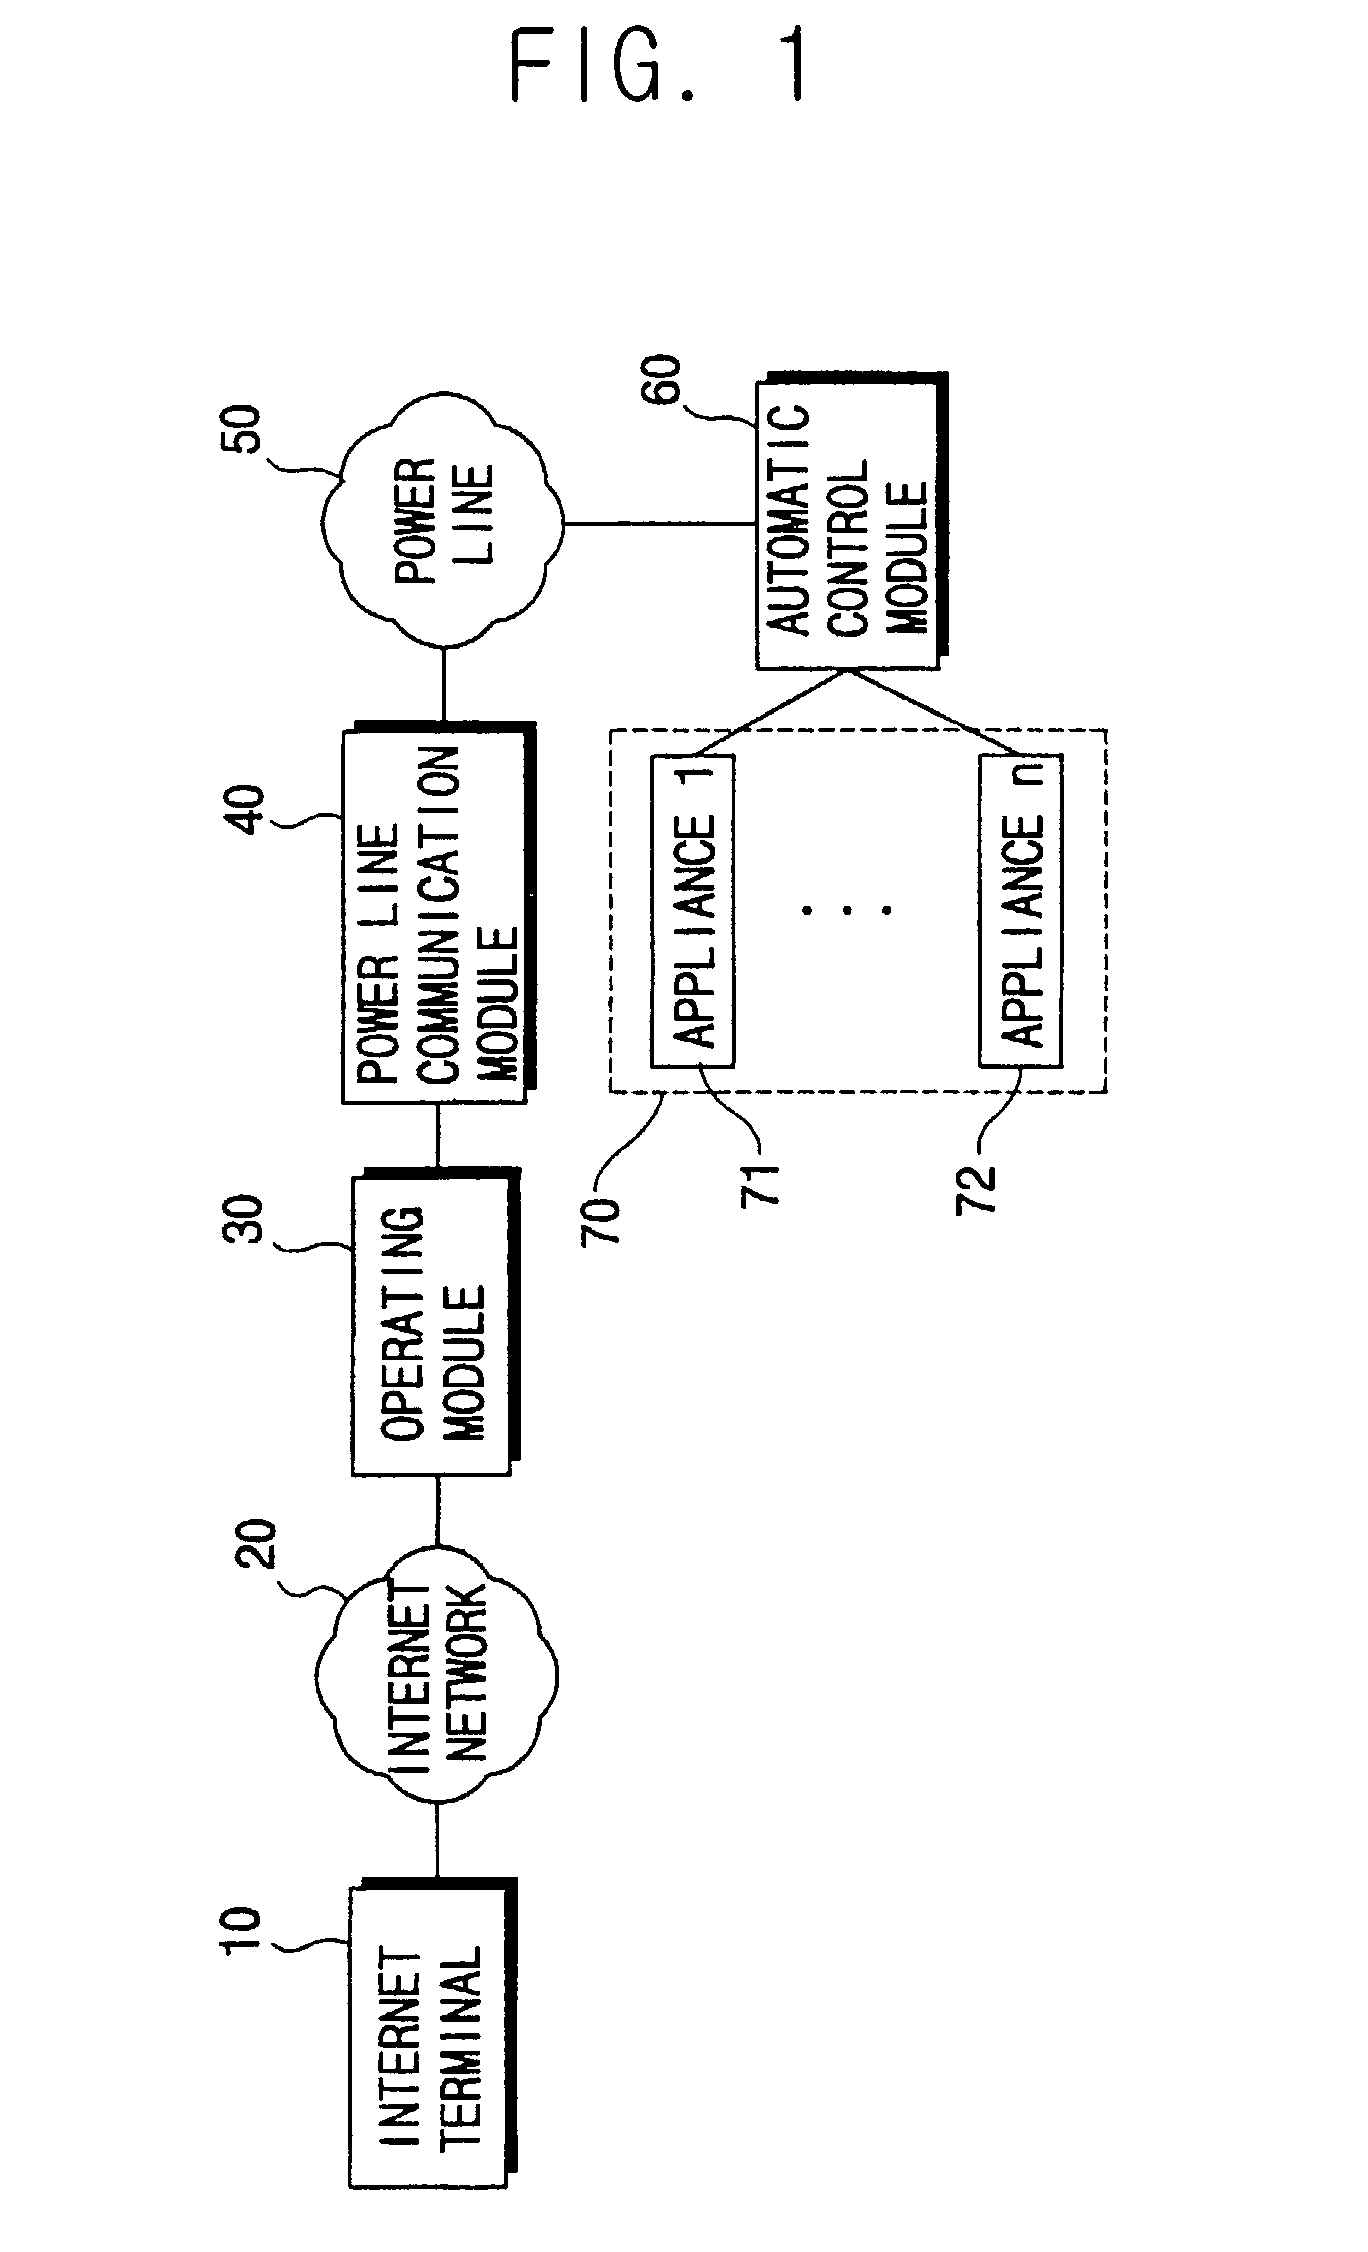 Automatic control system using power line communication method